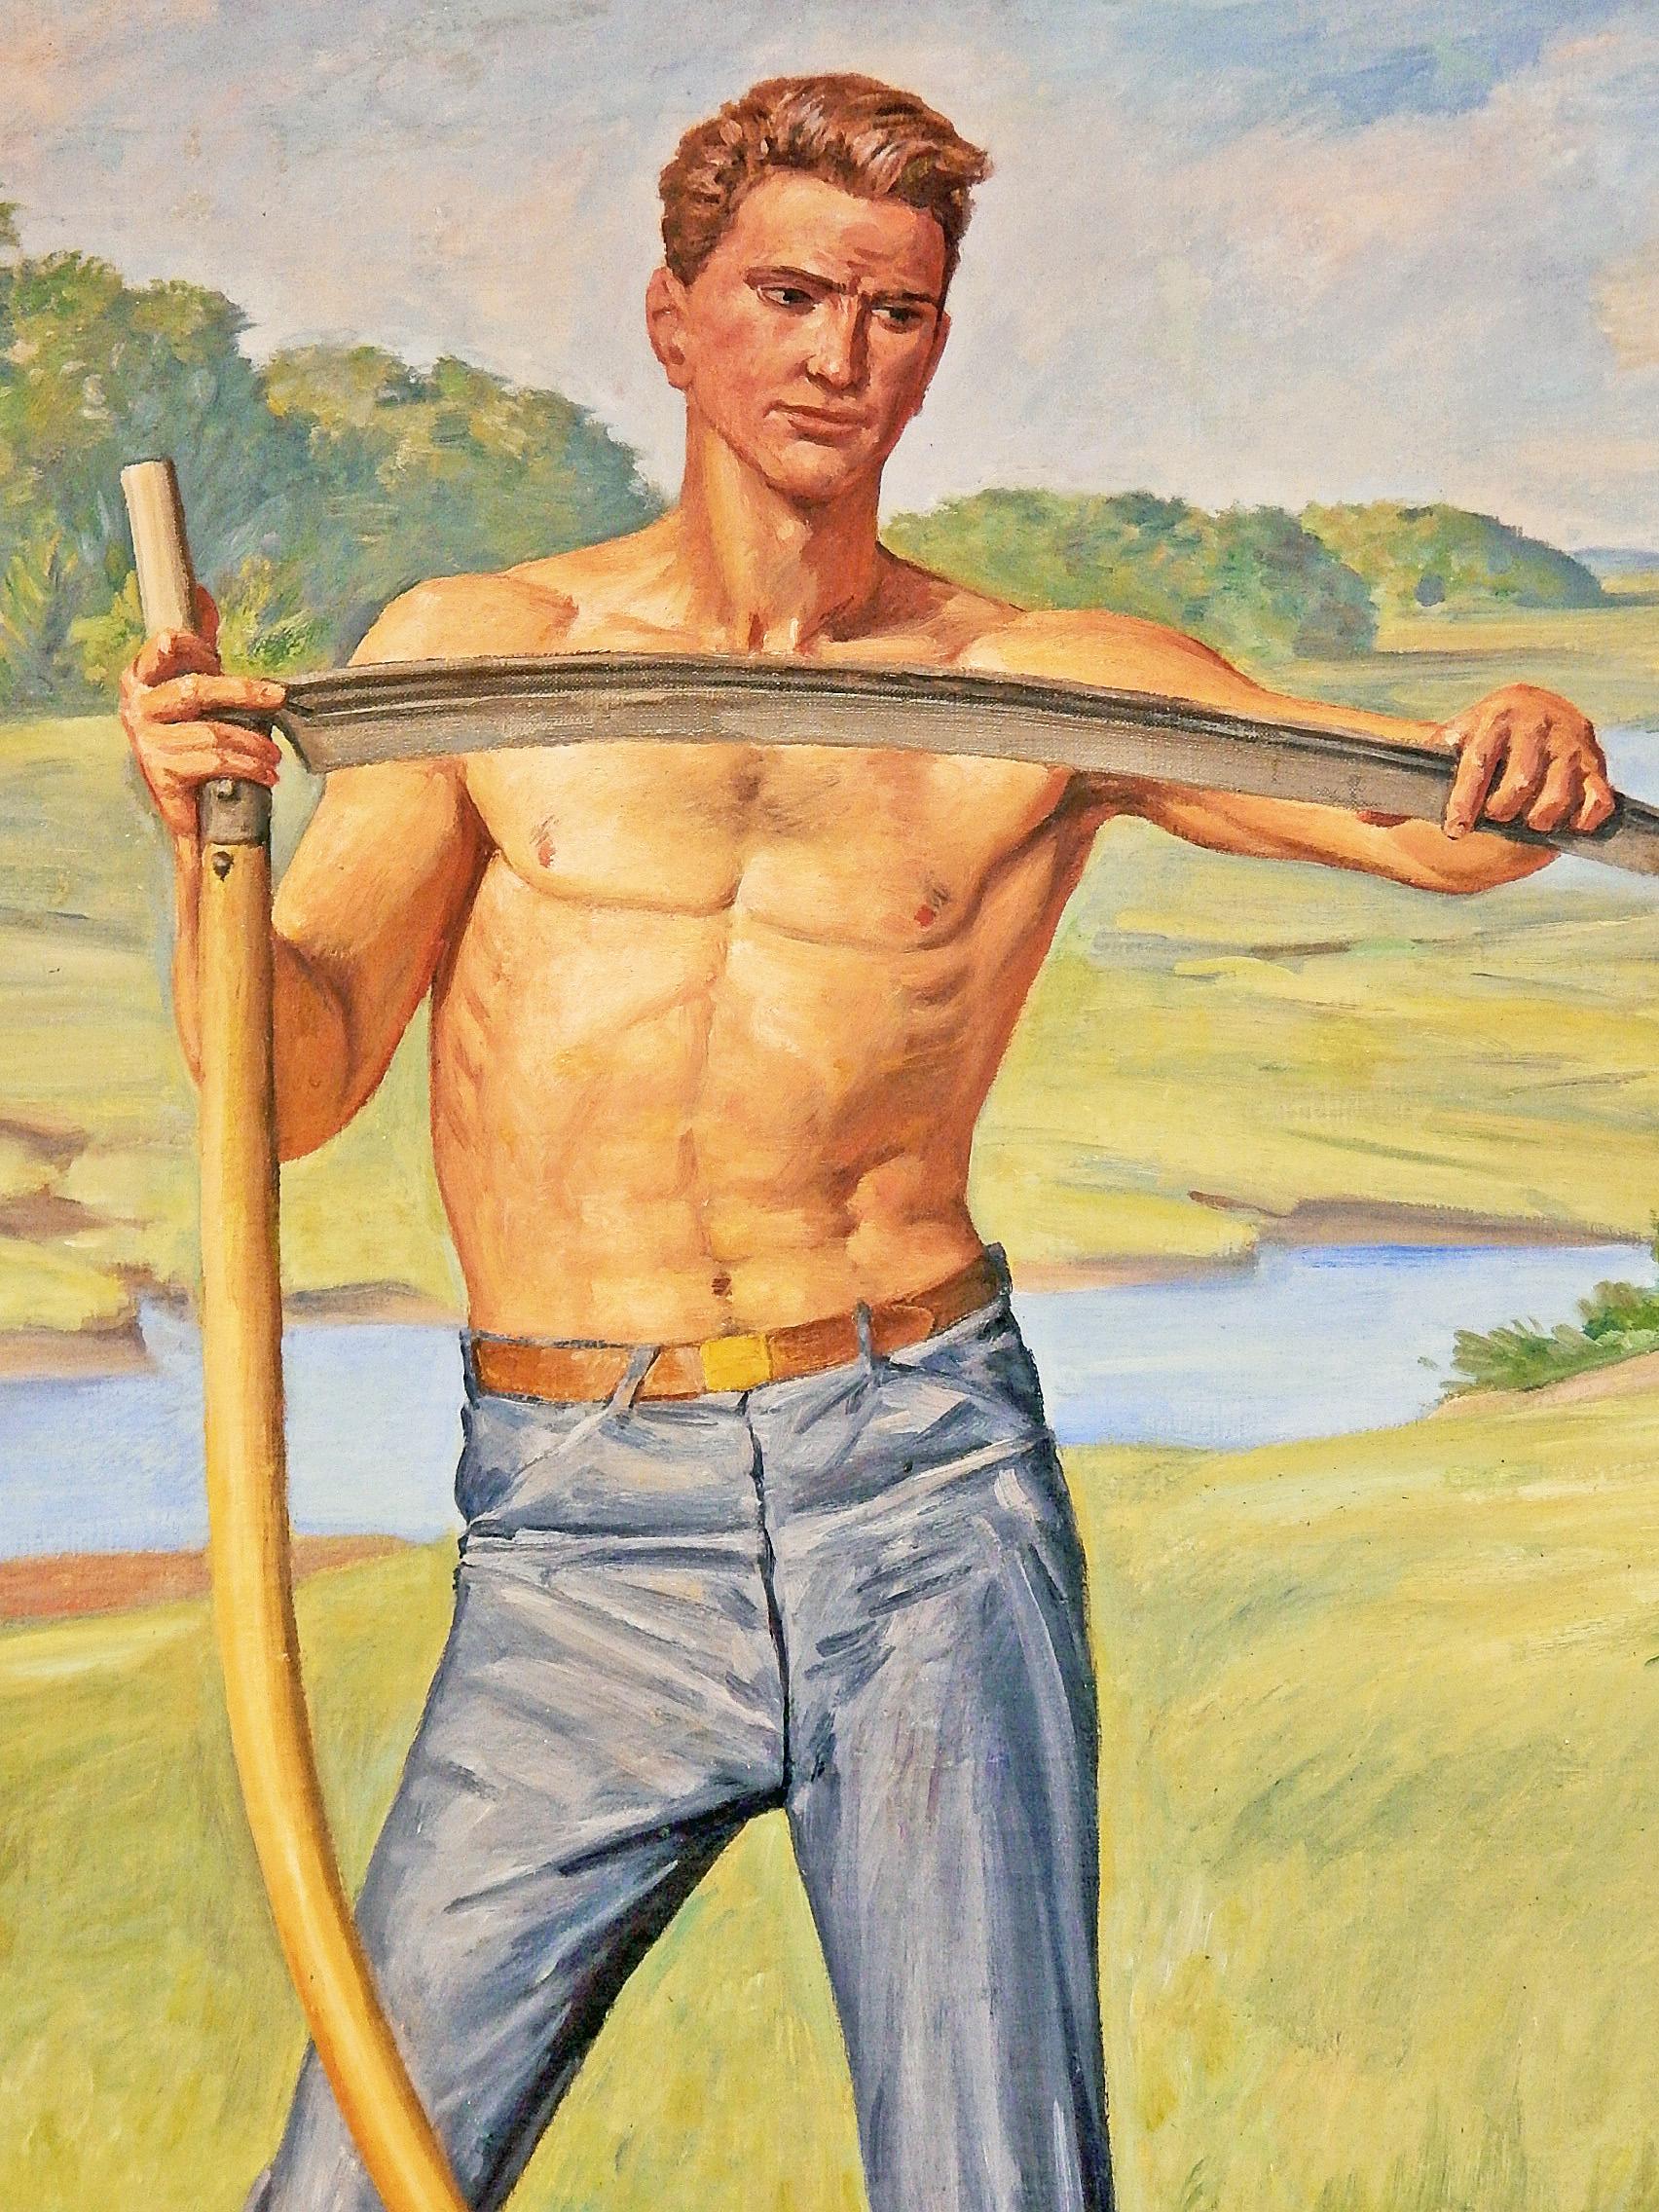 Drenched with sun and full of optimism, this depiction of a shirtless farm worker, with scythe in hand, is a high-spirited paean to the American laborer, at a time when the Works Progress Administration and other institutions were commissioning